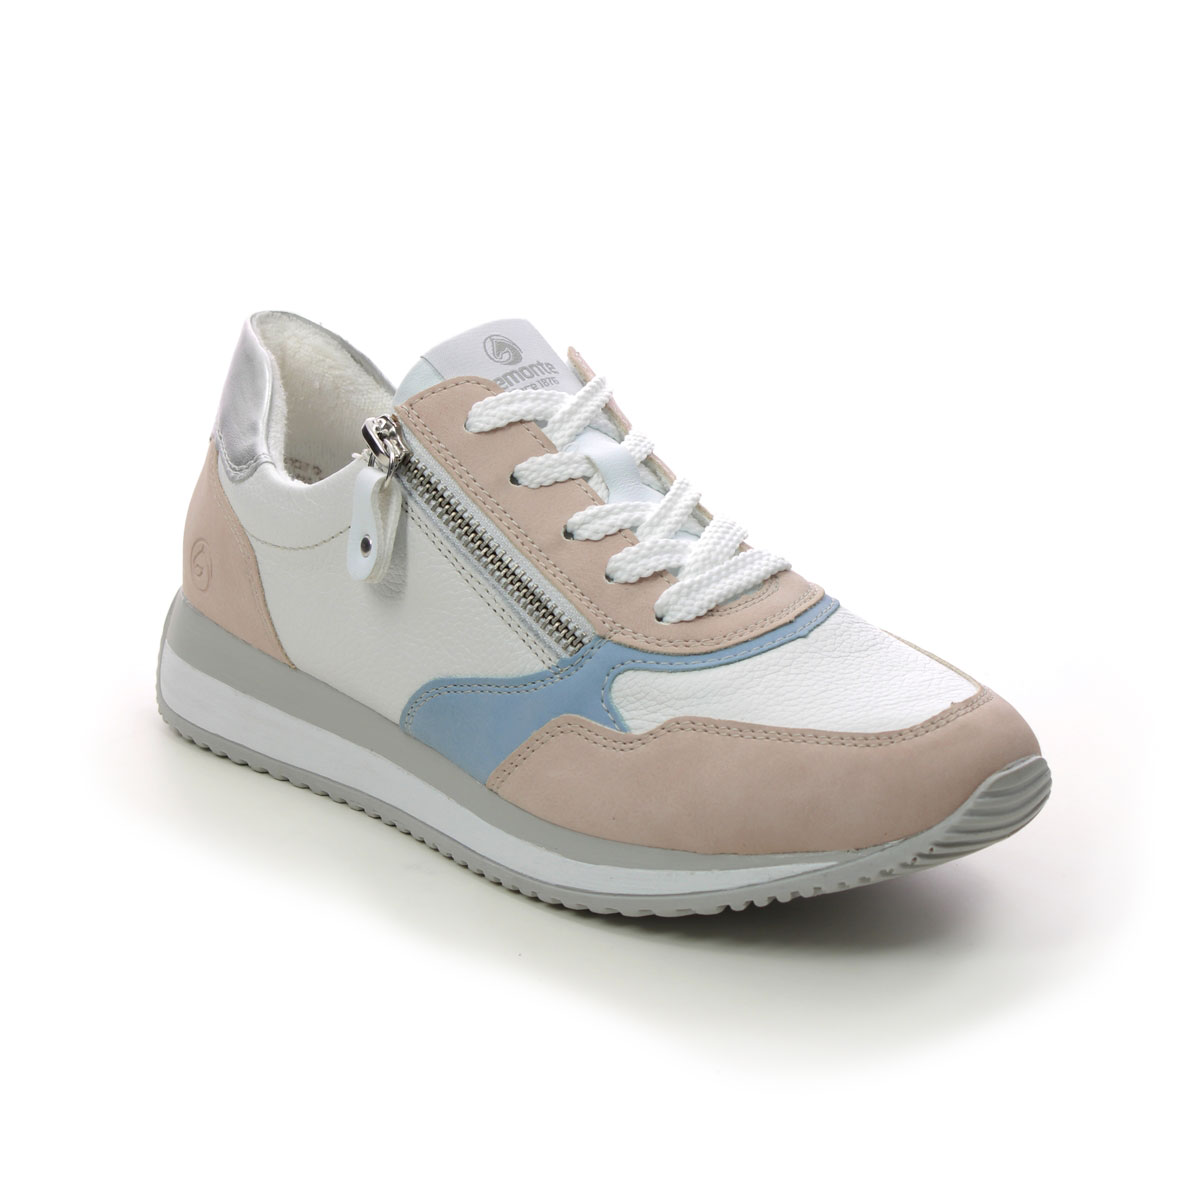 Remonte Vapod Zip White Blue Pink Womens Trainers D0H01-80 In Size 39 In Plain White Blue Pink